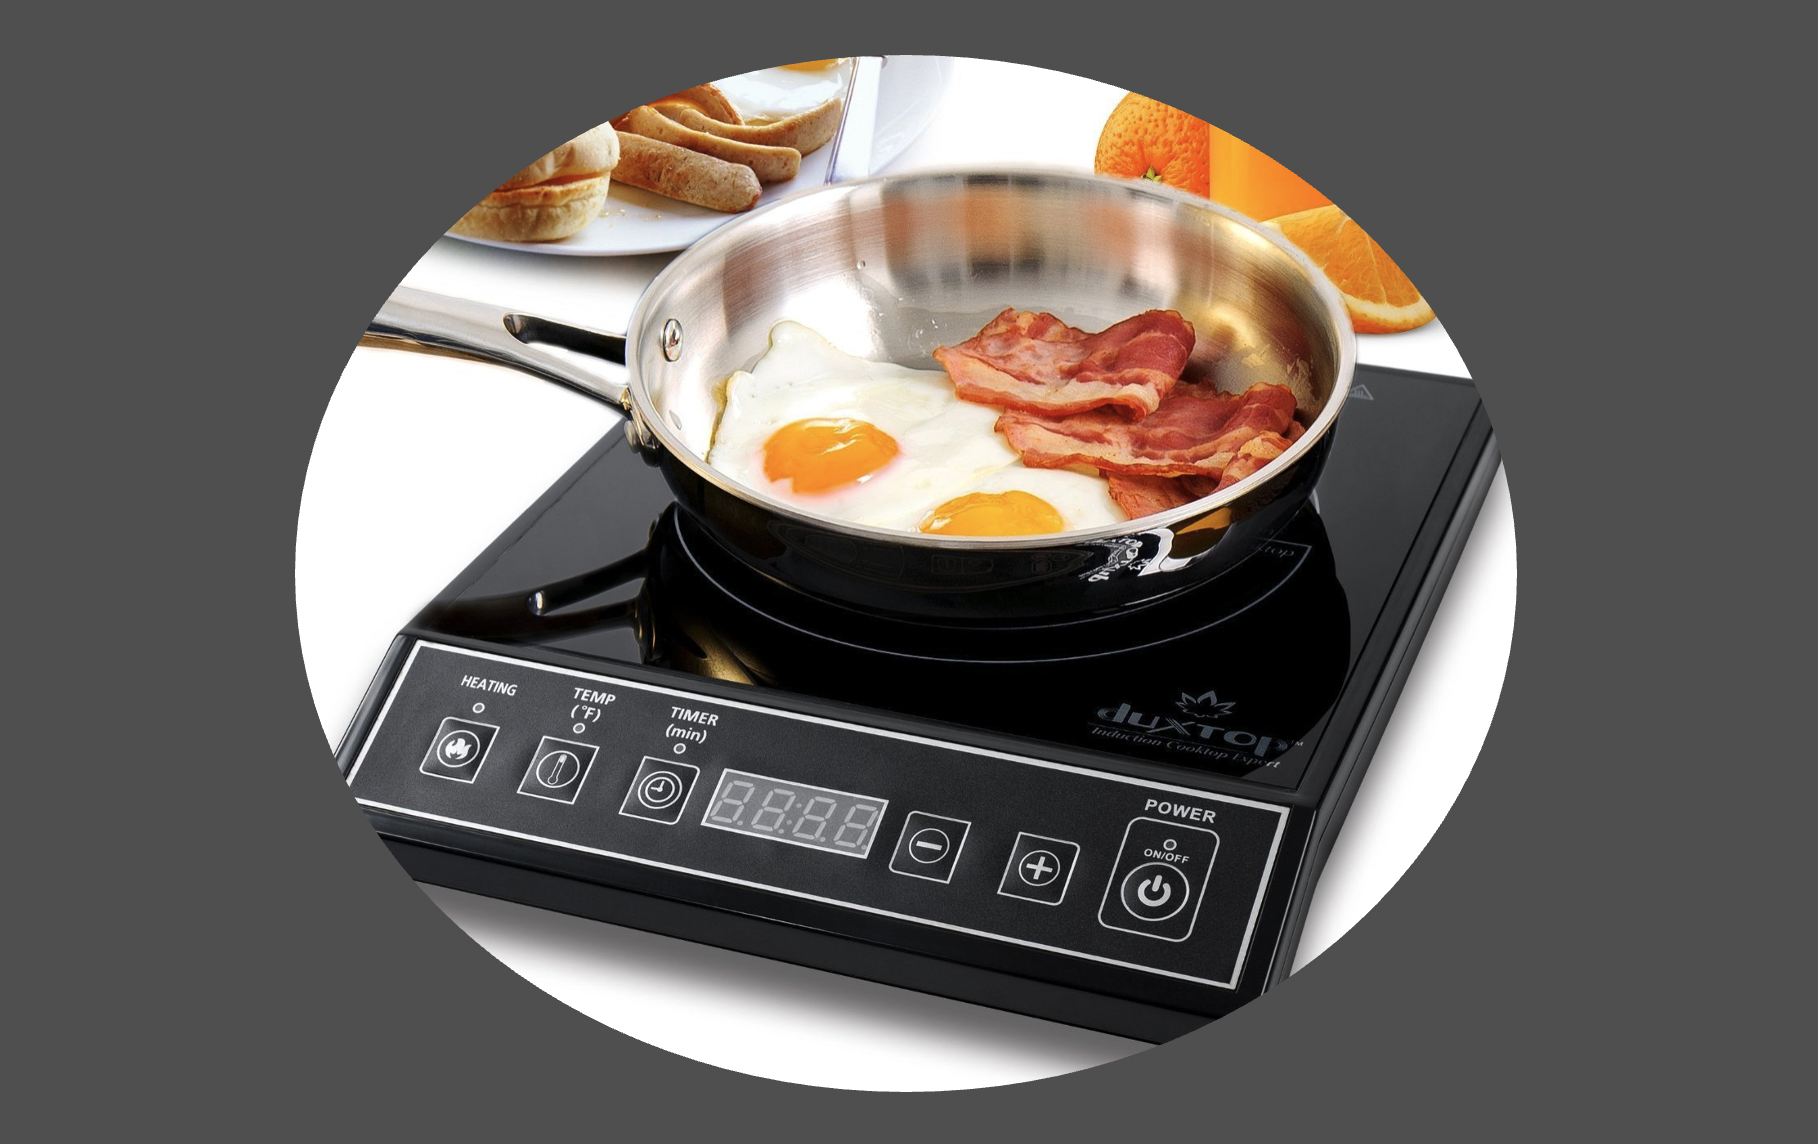 Cooking On SOLAR Power, Is This A Solution? - Induction Cooktop by Duxtop 